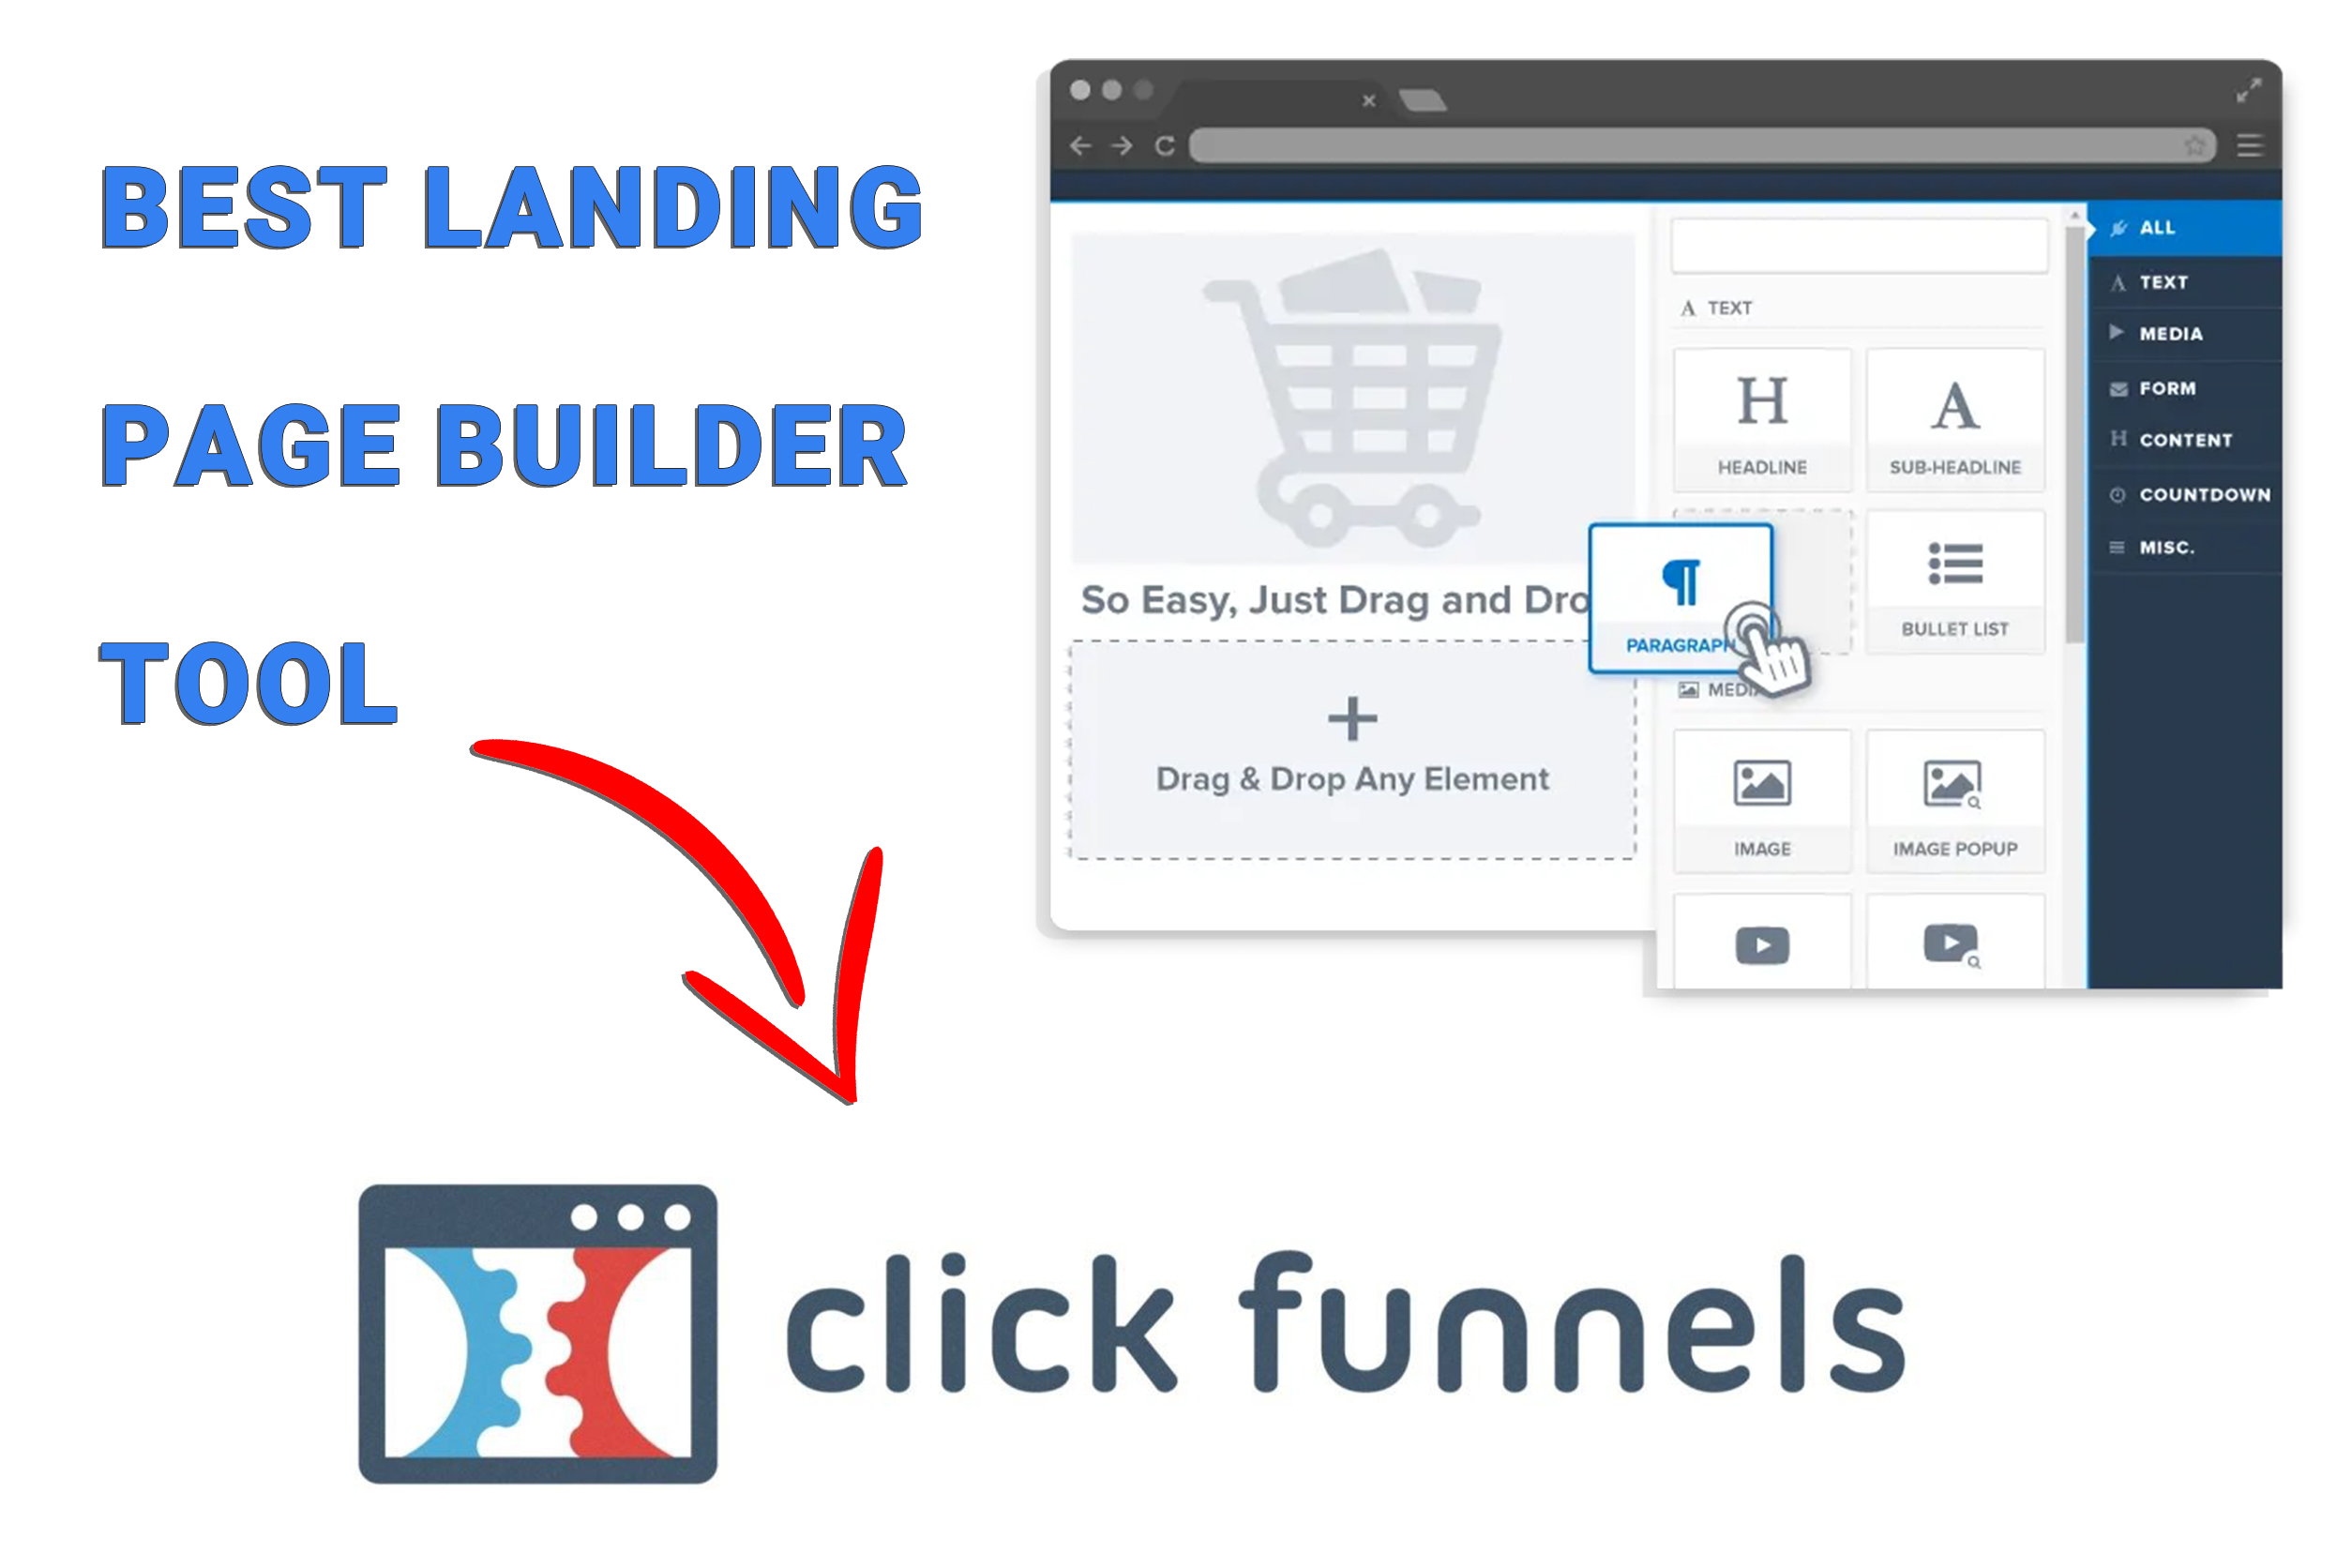 How Does Clickfunnels Actually Work?